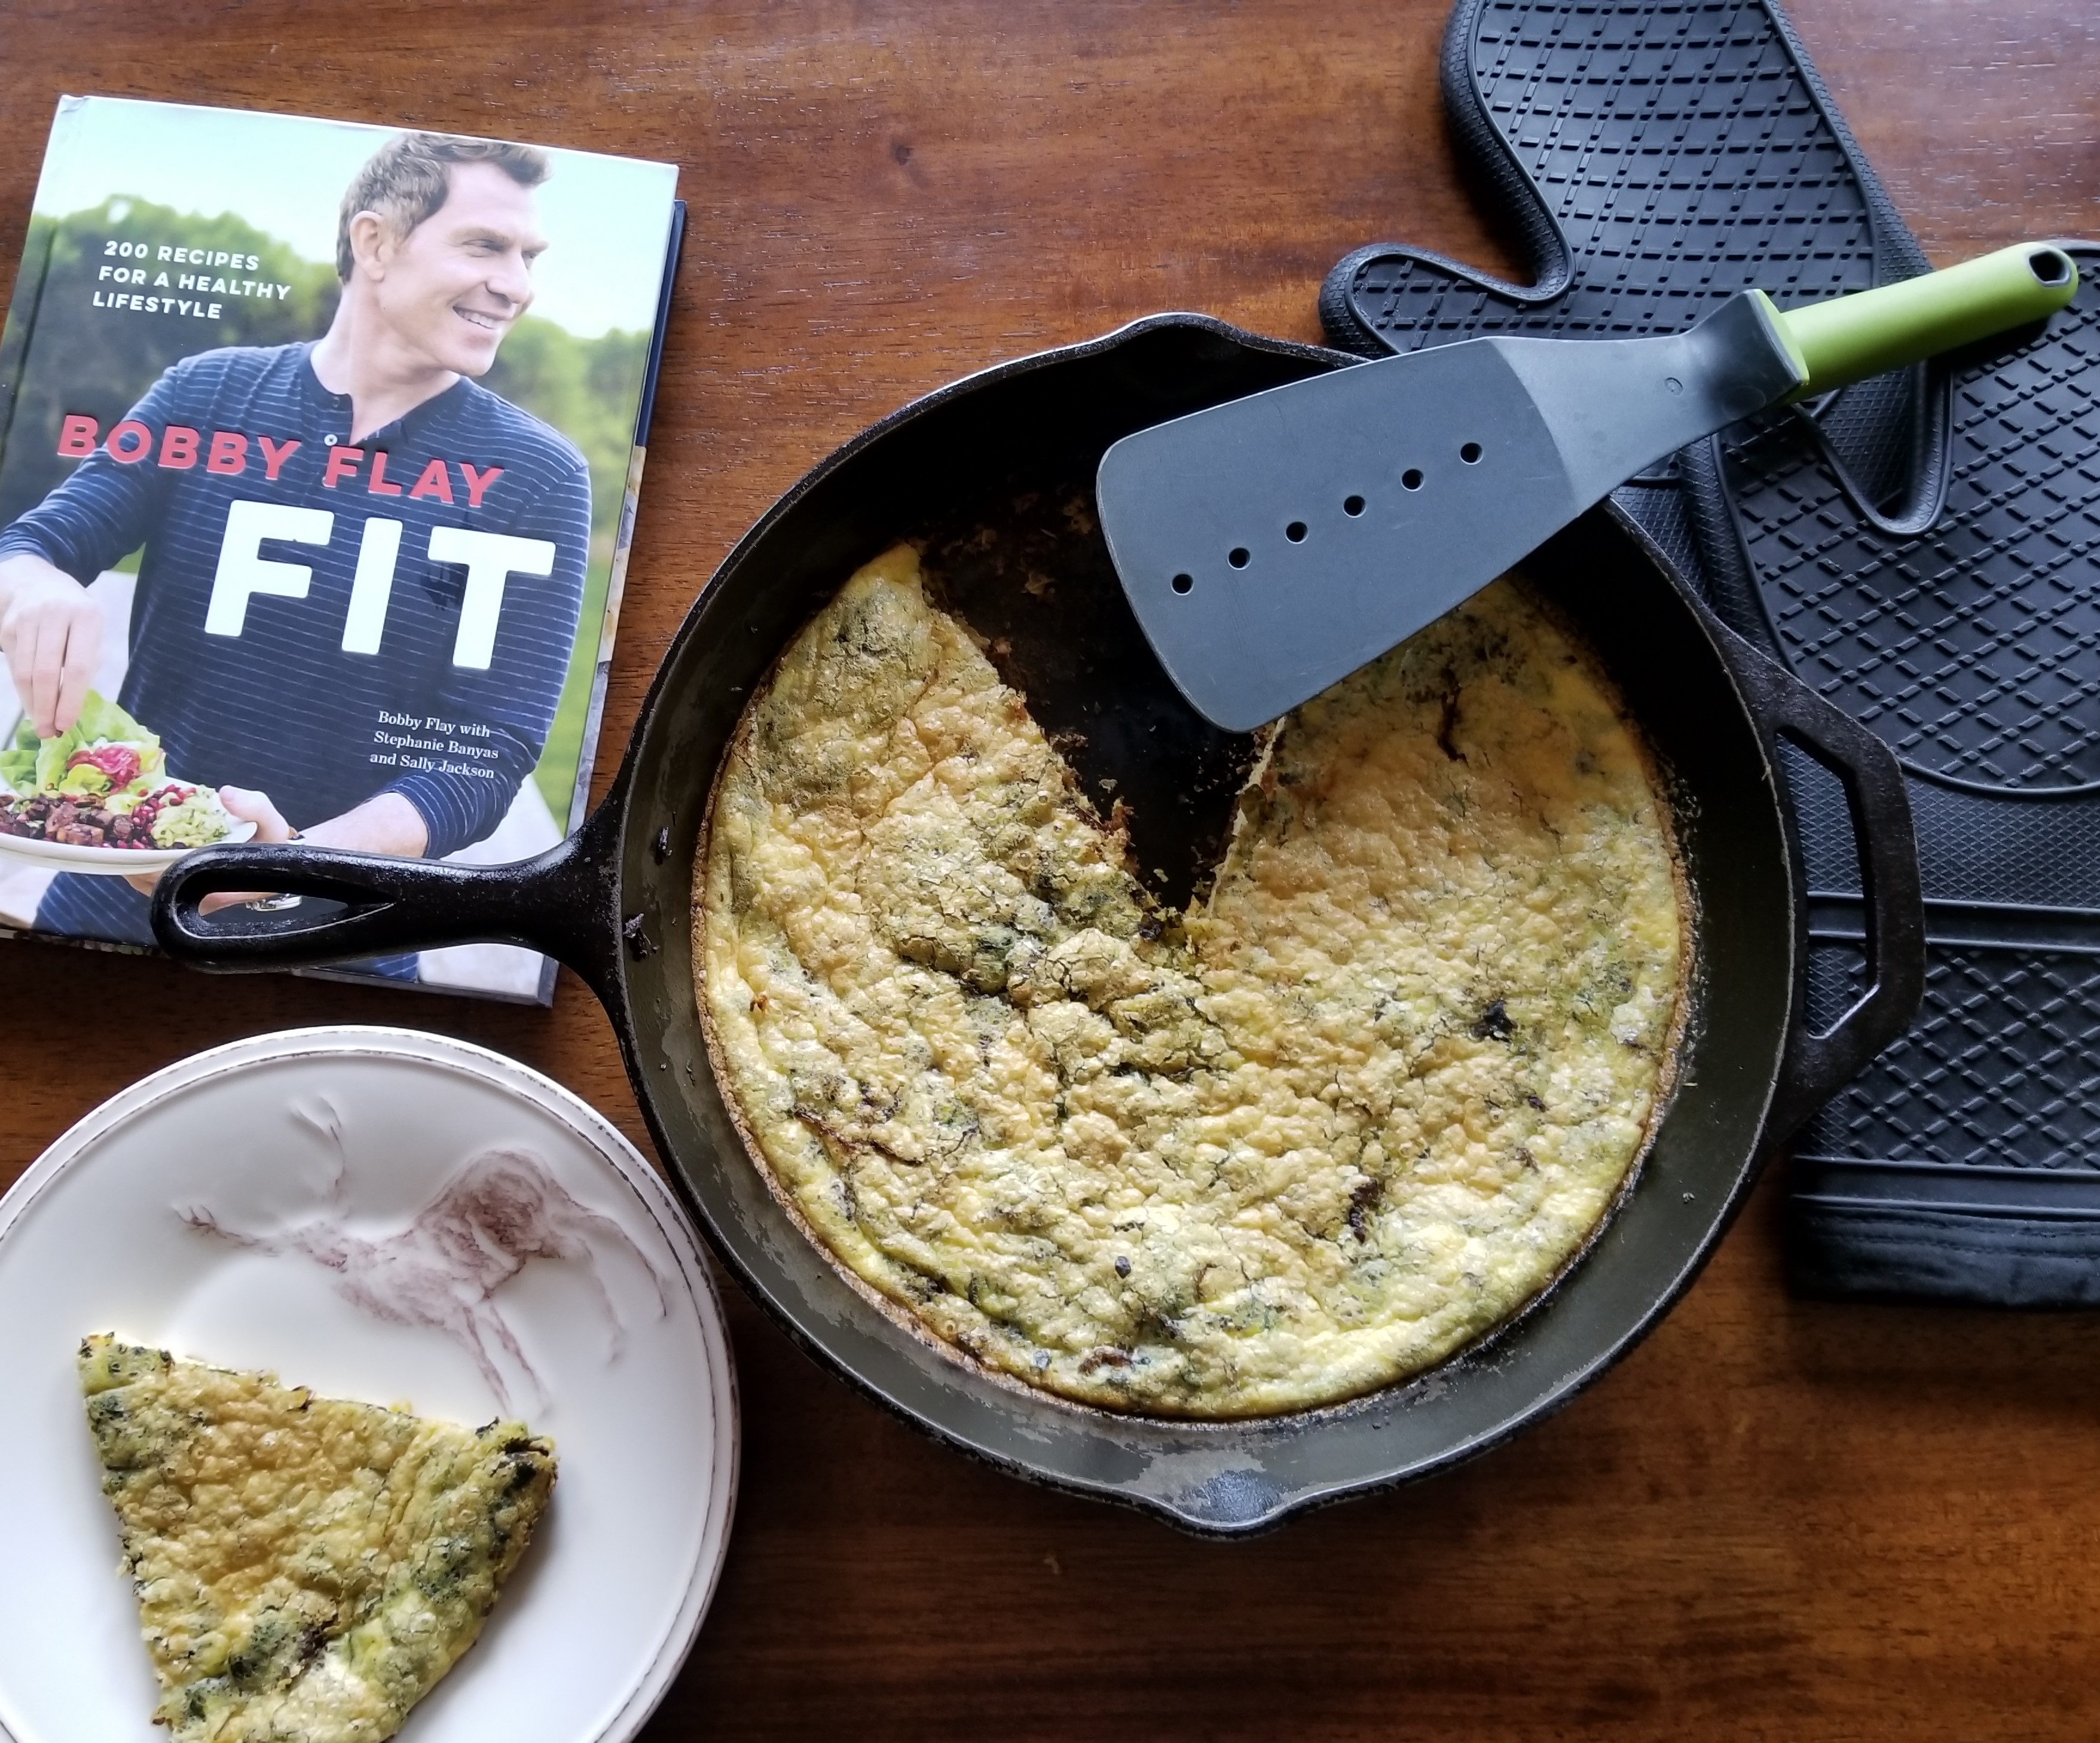 New Bobby Flay Cookbook: Bobby At Home + Giveaway